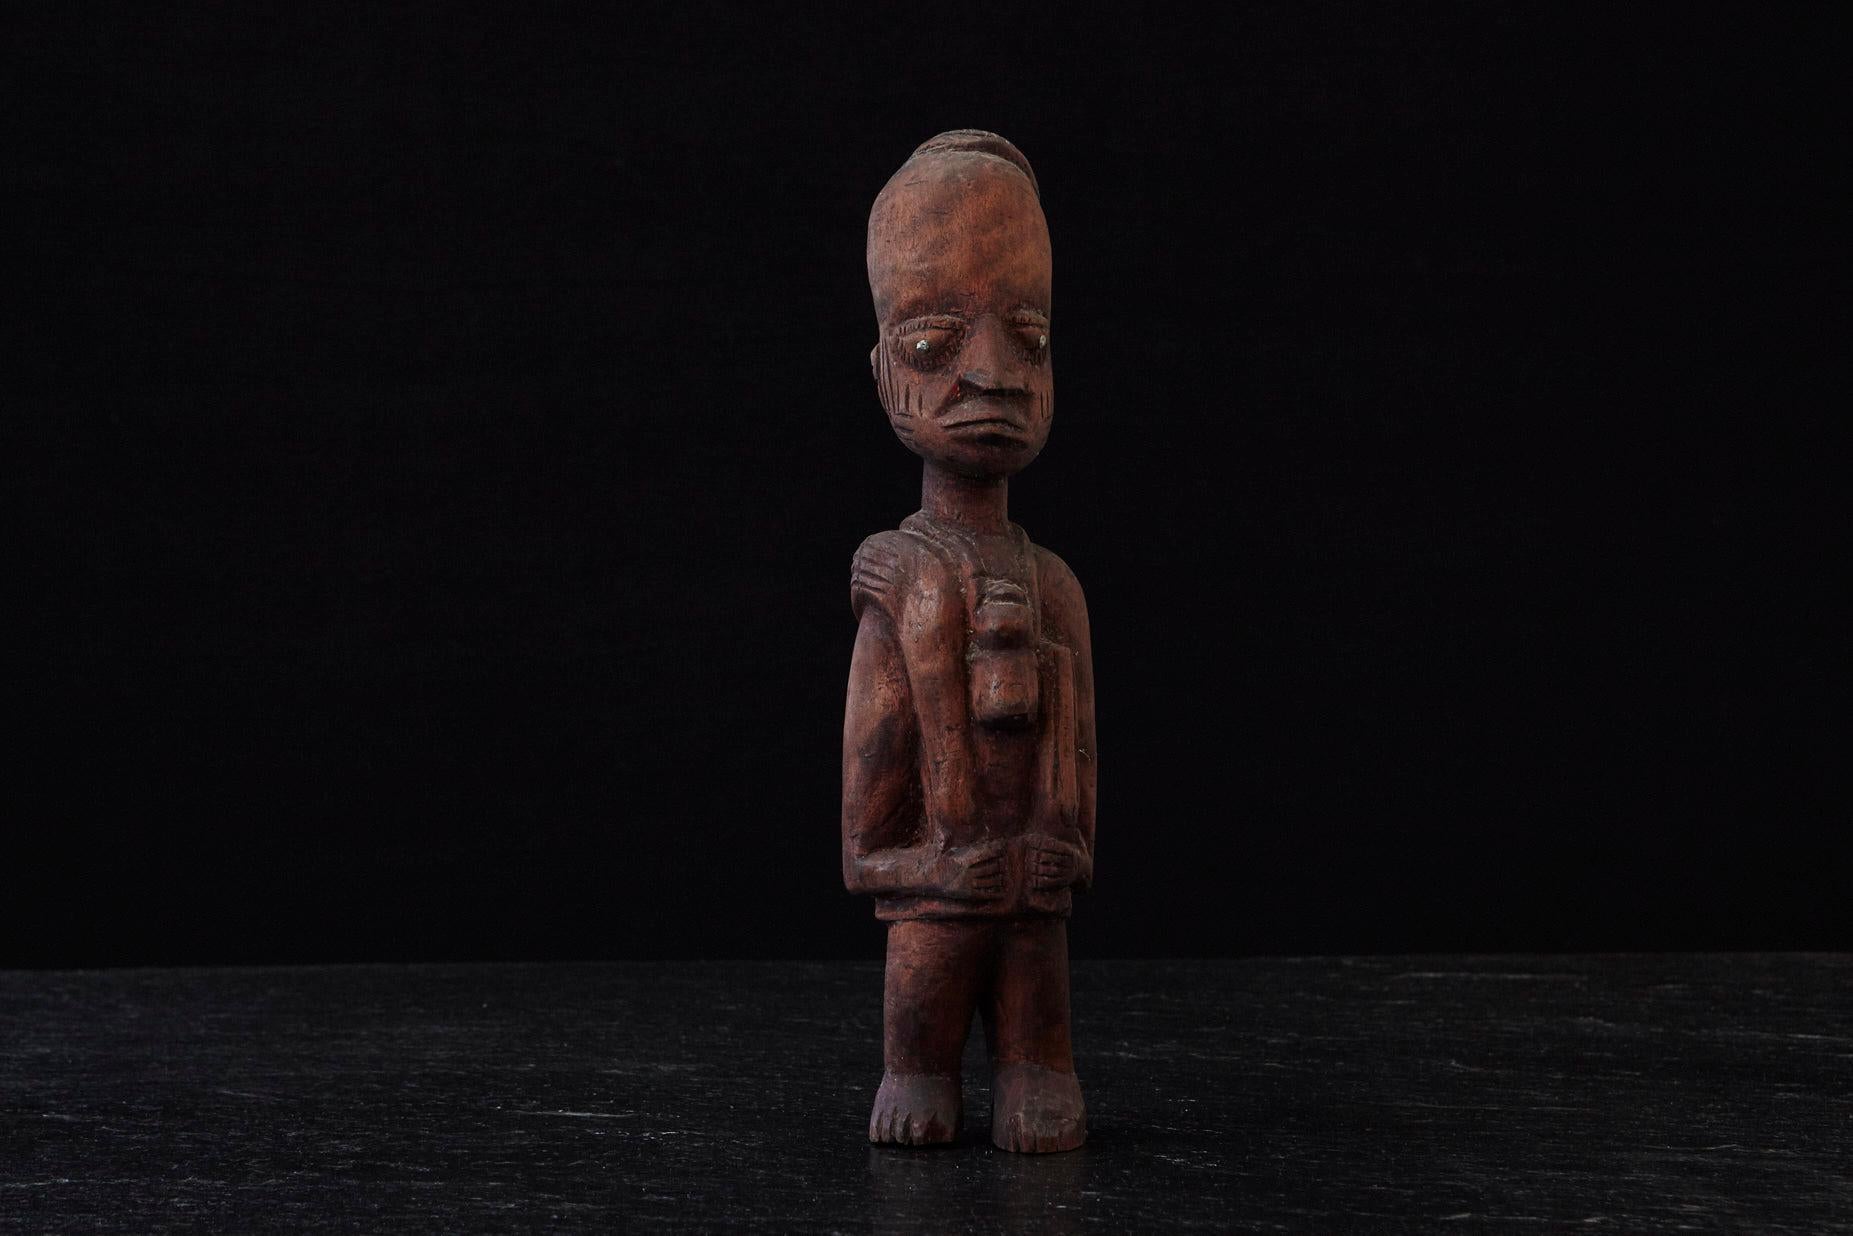 Tall hand-carved wooden statue of a Ju Ju Man crafted by the Egba People in Abeokuta, Ogun State (part of Nigeria), circa 1940s.
The pupils are made from nails, which intensifies the look and the expression of the Ju Ju Man, as the rest of the